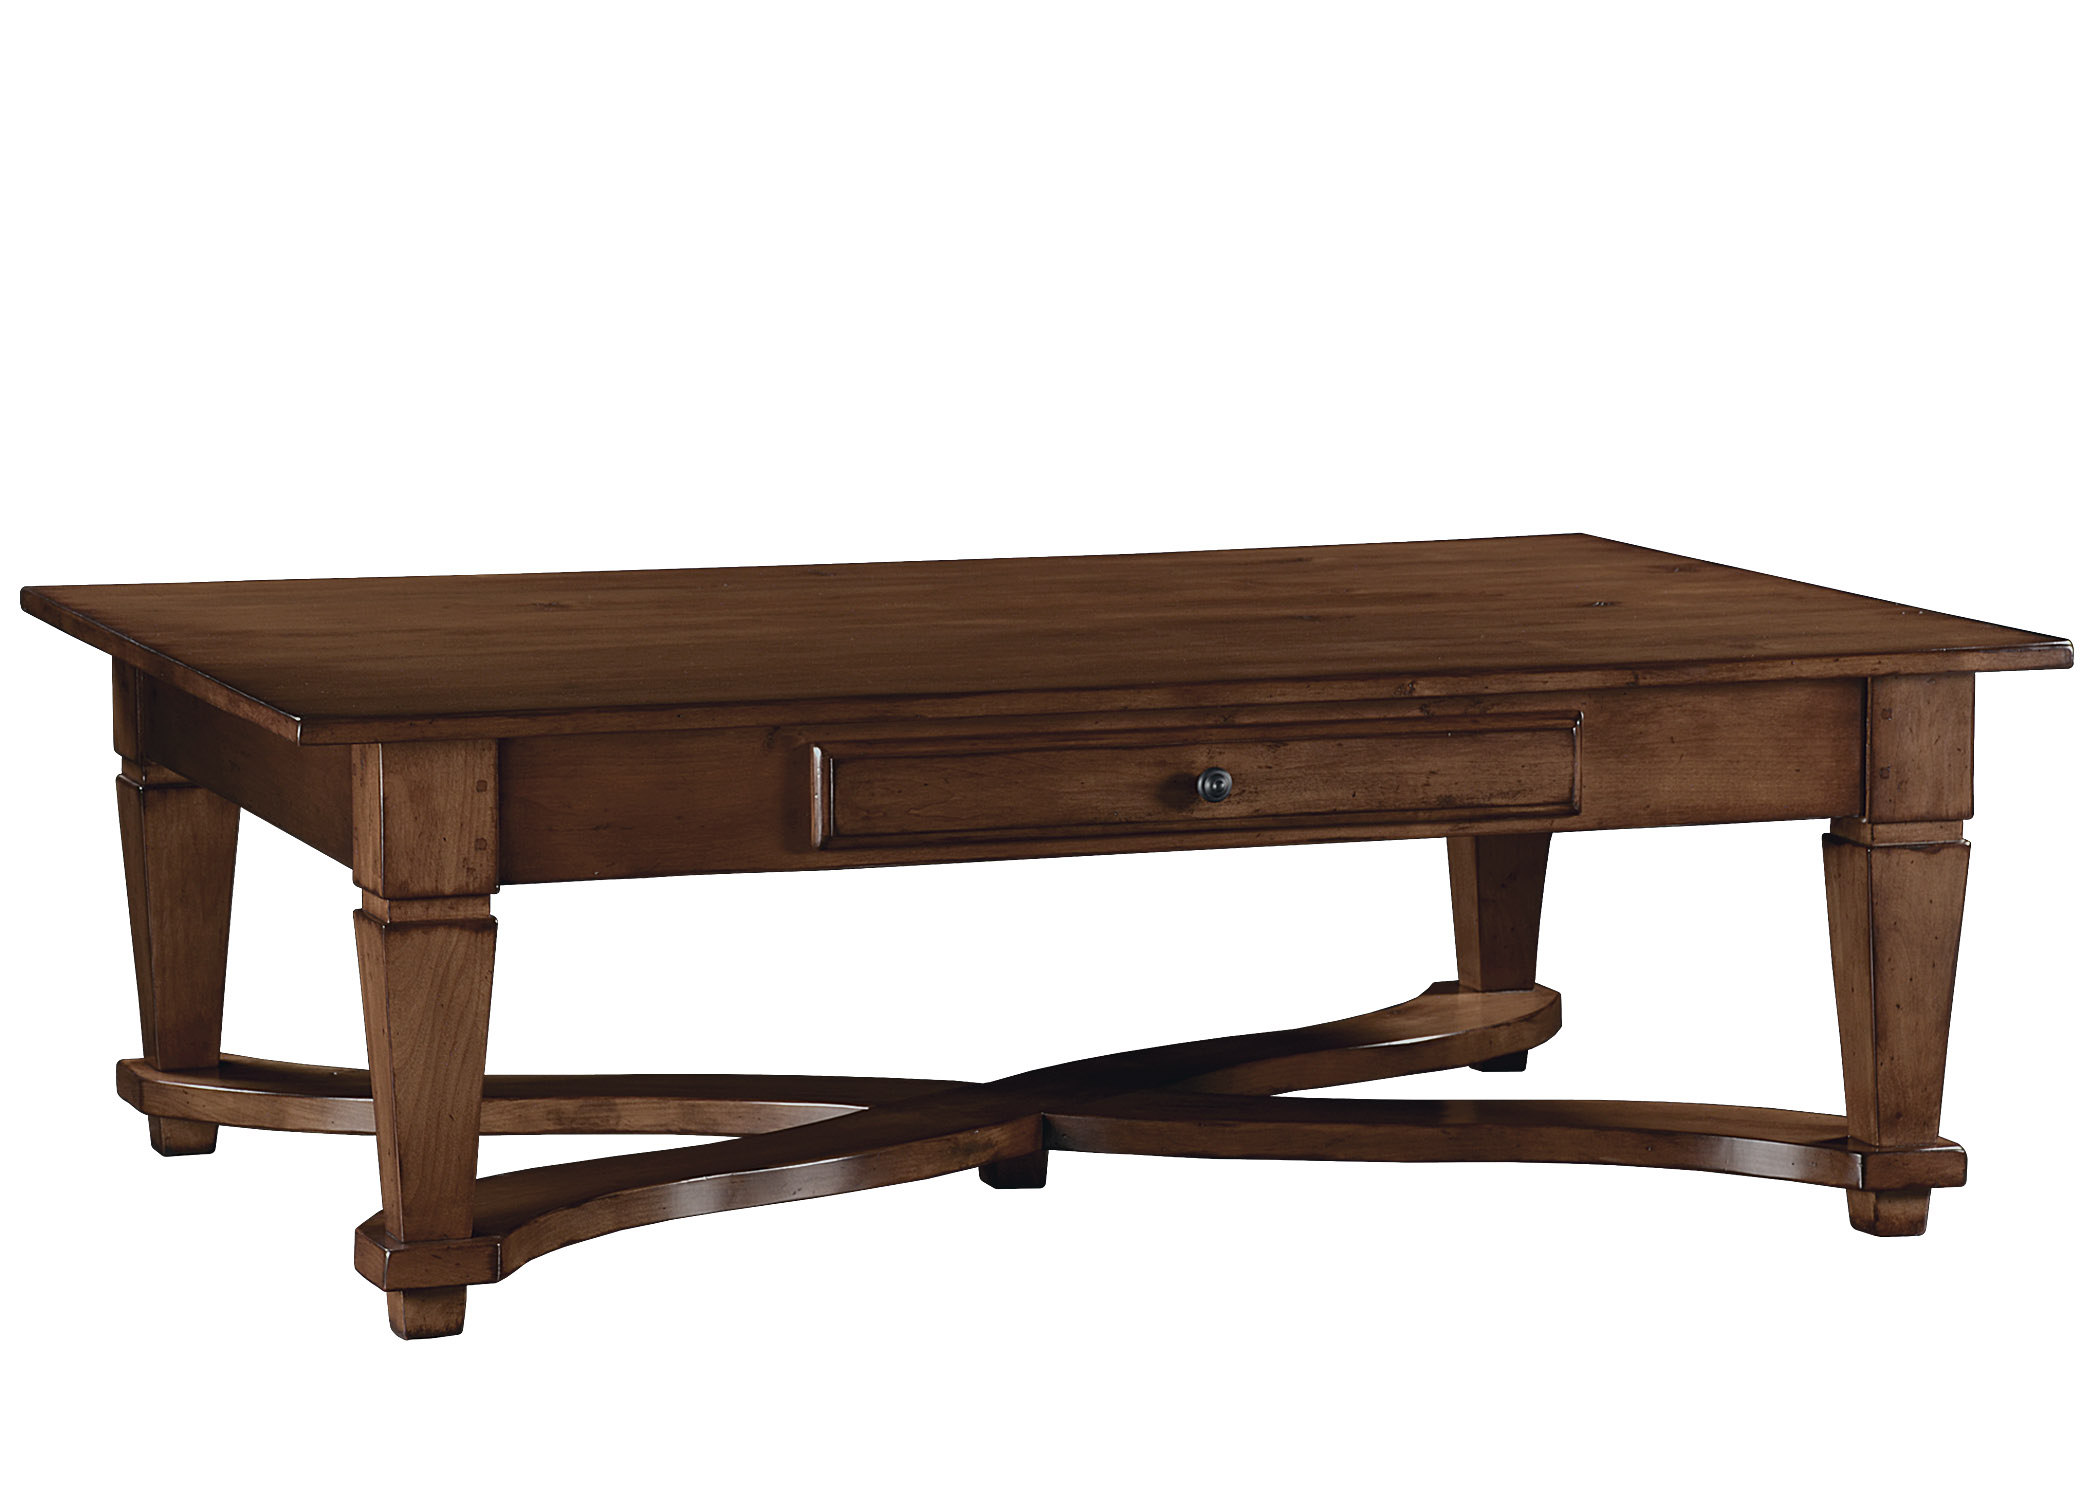 Cliveden transitional coffee cocktail table with x stretcher by Woodland furniture in Idaho Falls